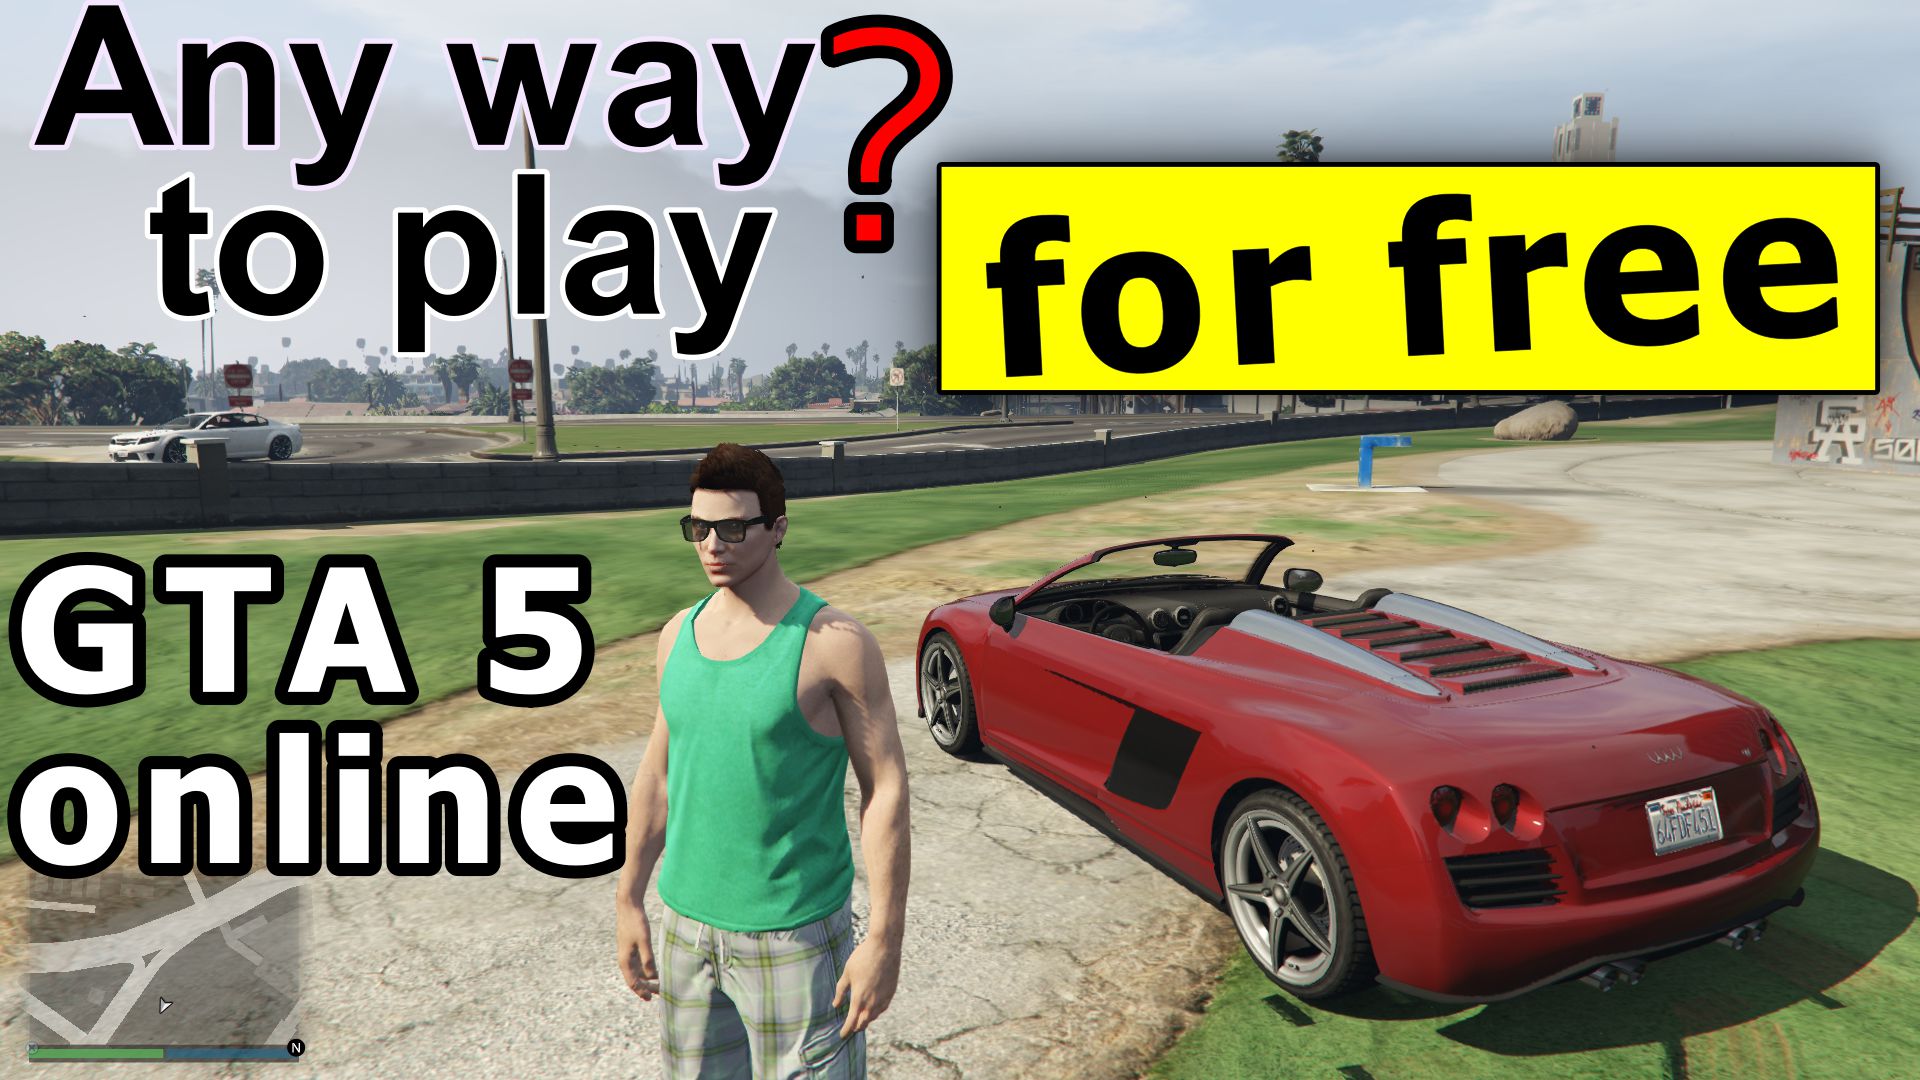 Is there any way to play GTA 5 online for free